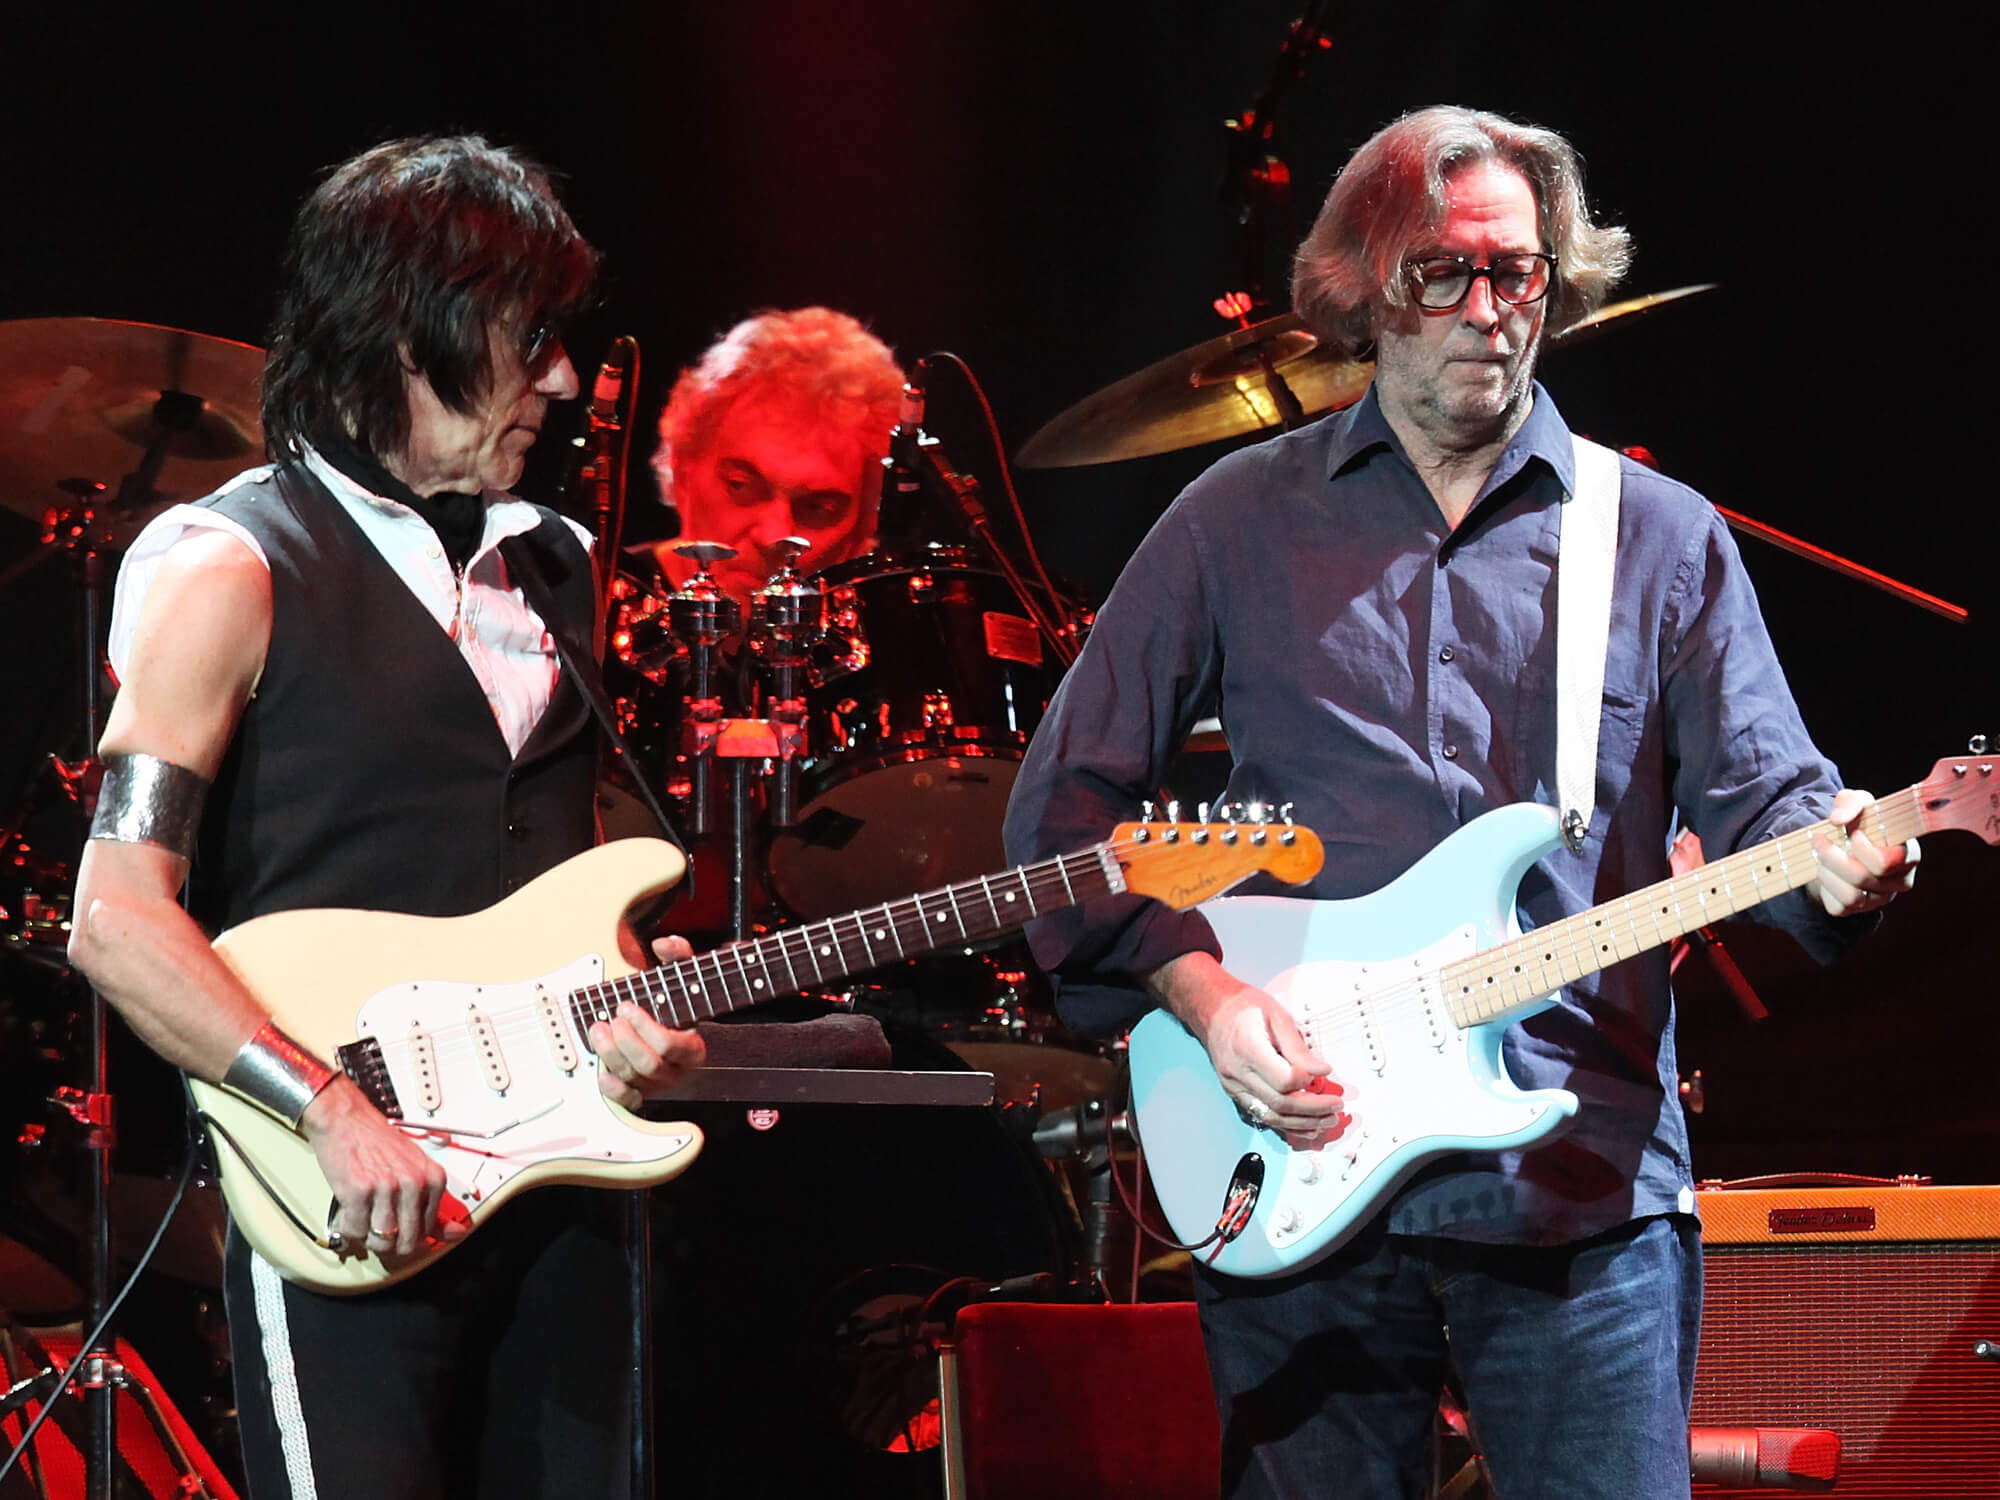 Jeff Beck and Eric Clapton